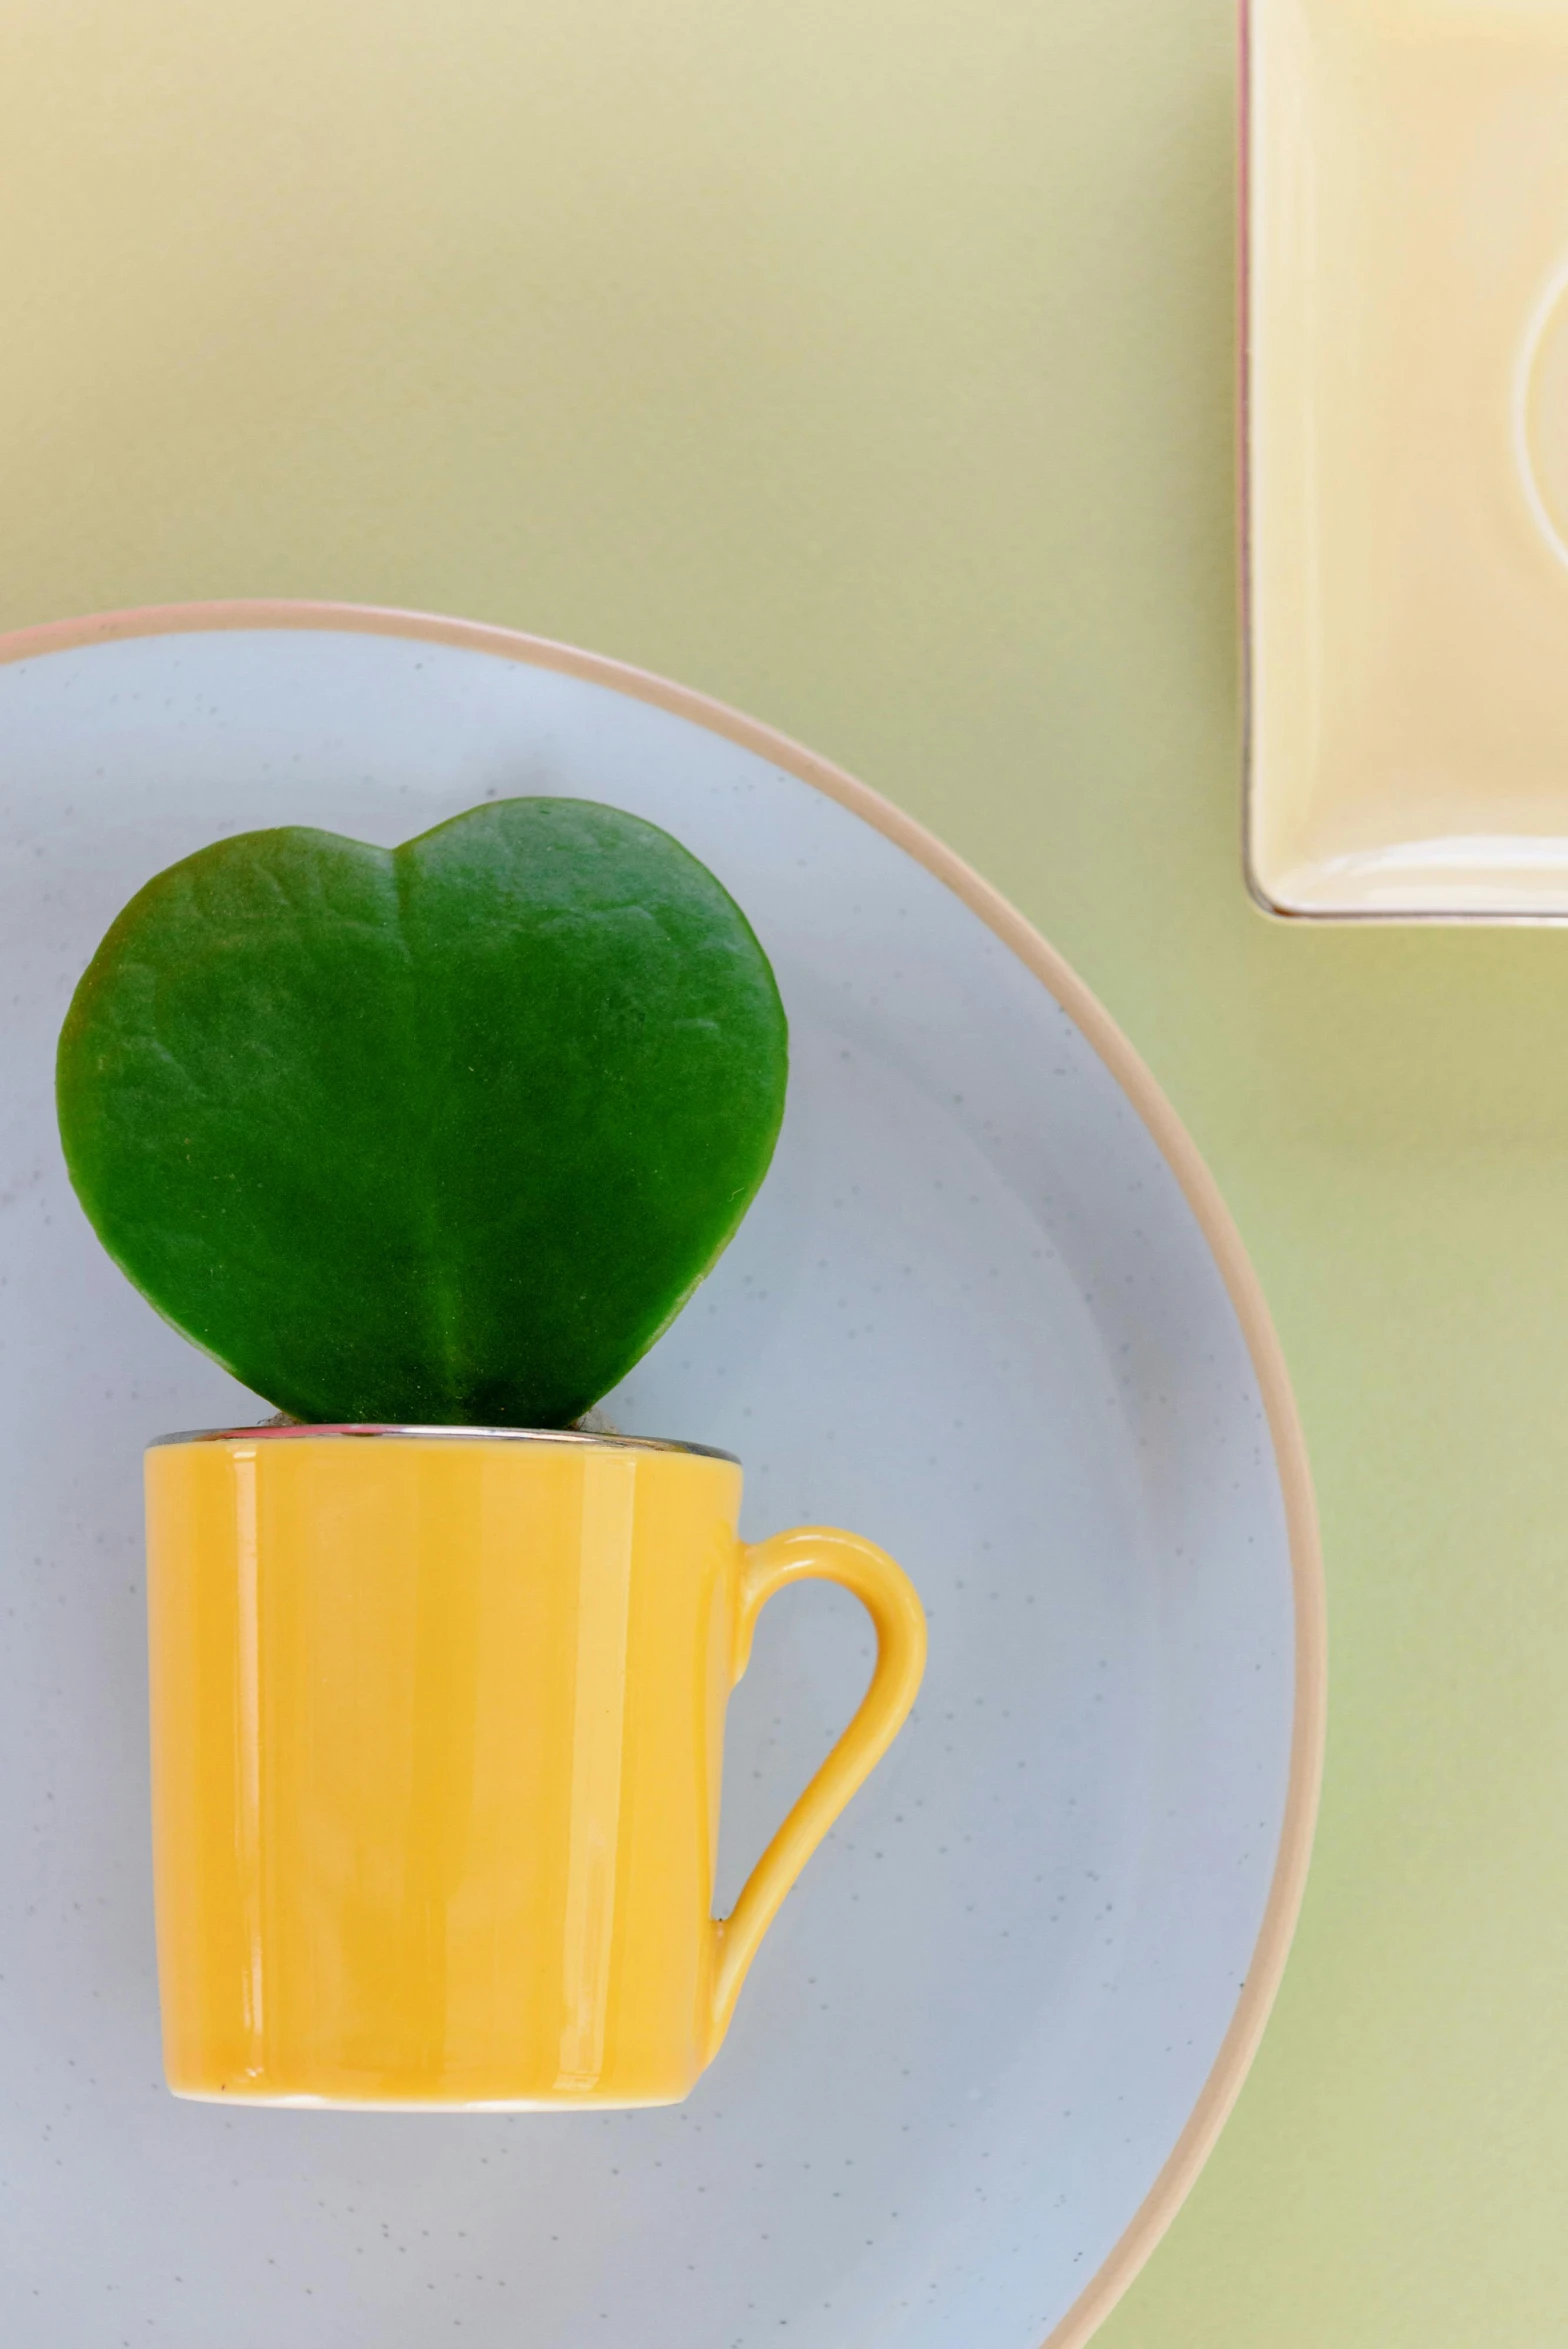 a green plant in a yellow cup on a plate, inspired by Jim Dine, hearts, sustainable materials, jade green, product display photograph